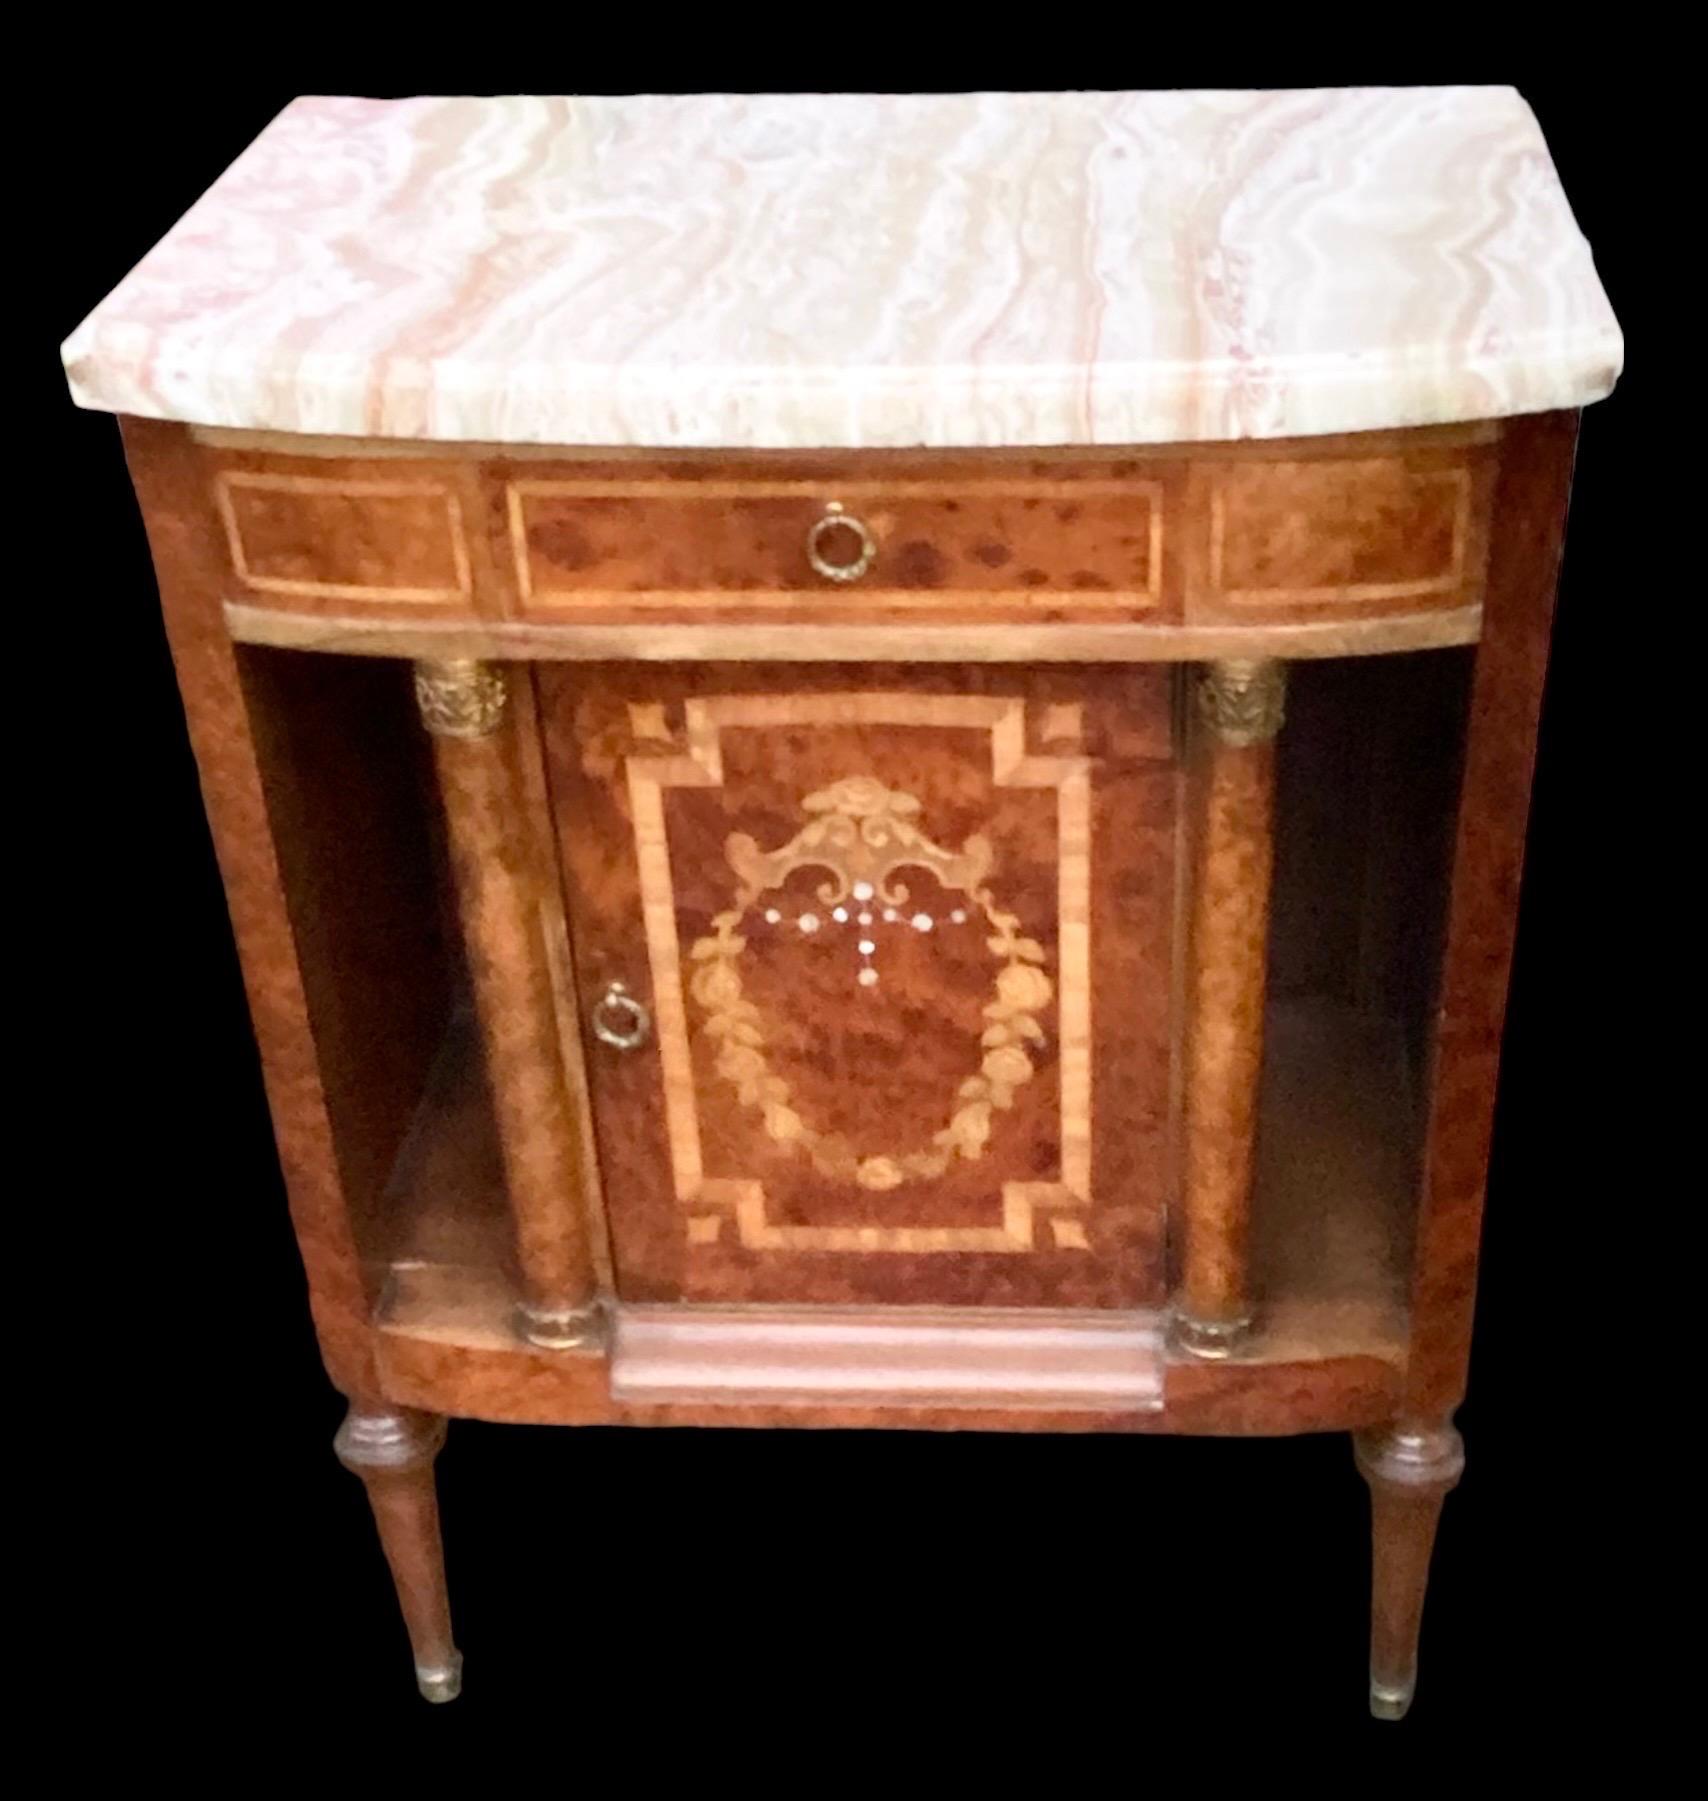 A diminutive, vintage French burled mahogany, satin wood, boxwood and inlaid mother of pearl cabinet with a slightly curved front, topped with a beautifully veined and thick creme marble. 

Underneath is one small inlaid drawer with a bronze ring